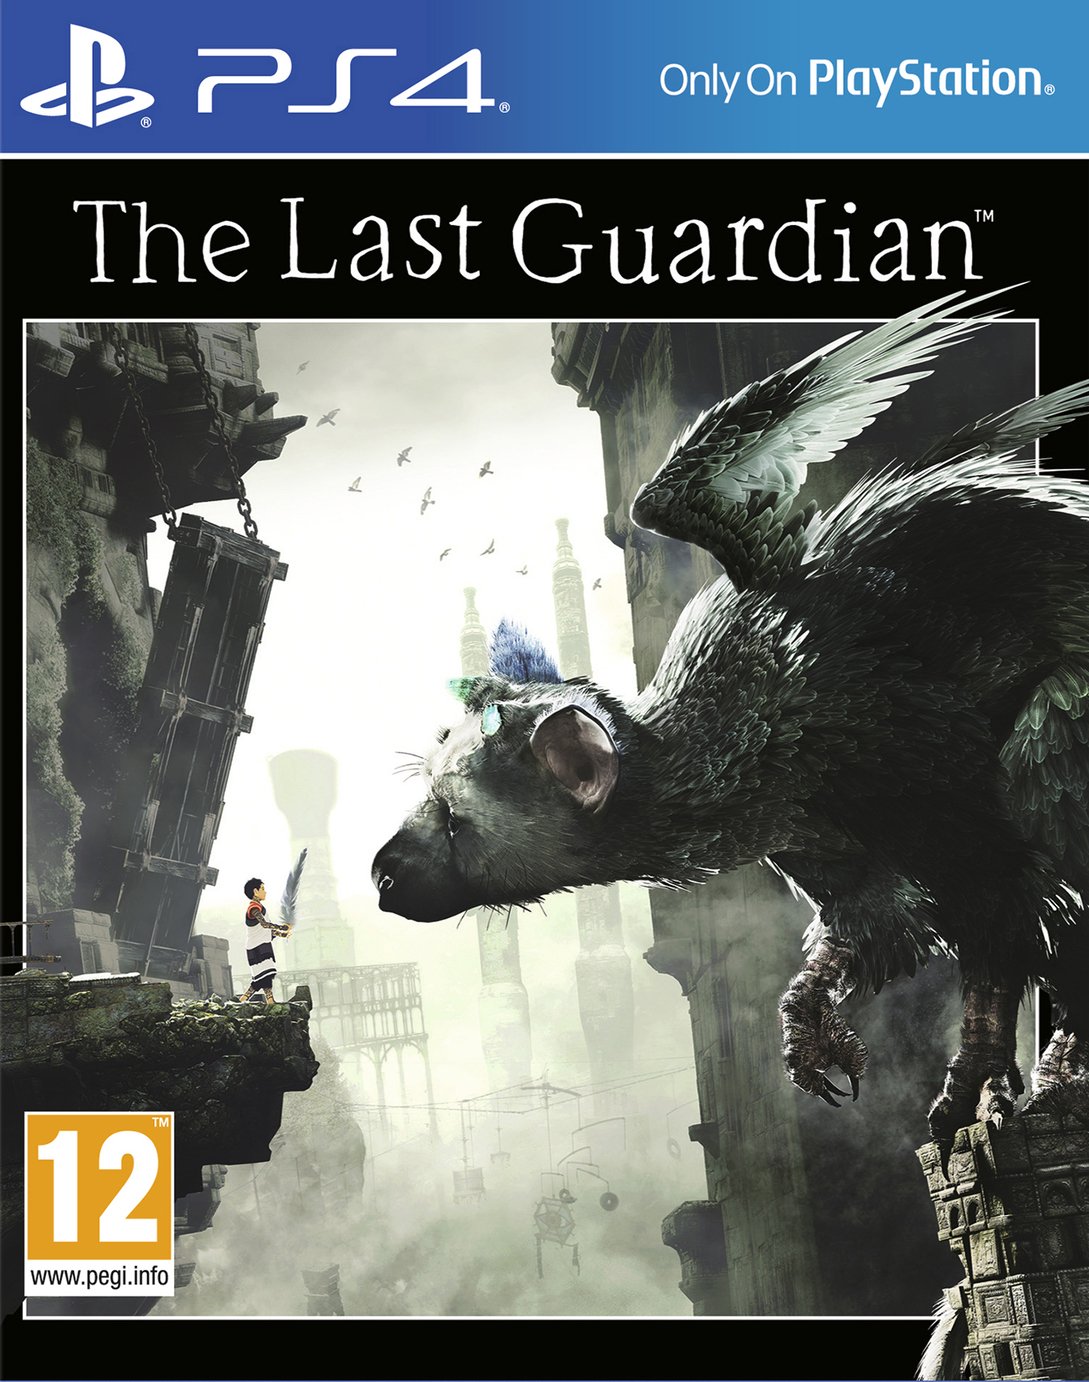 The Last Guardian PS4 Game. Review